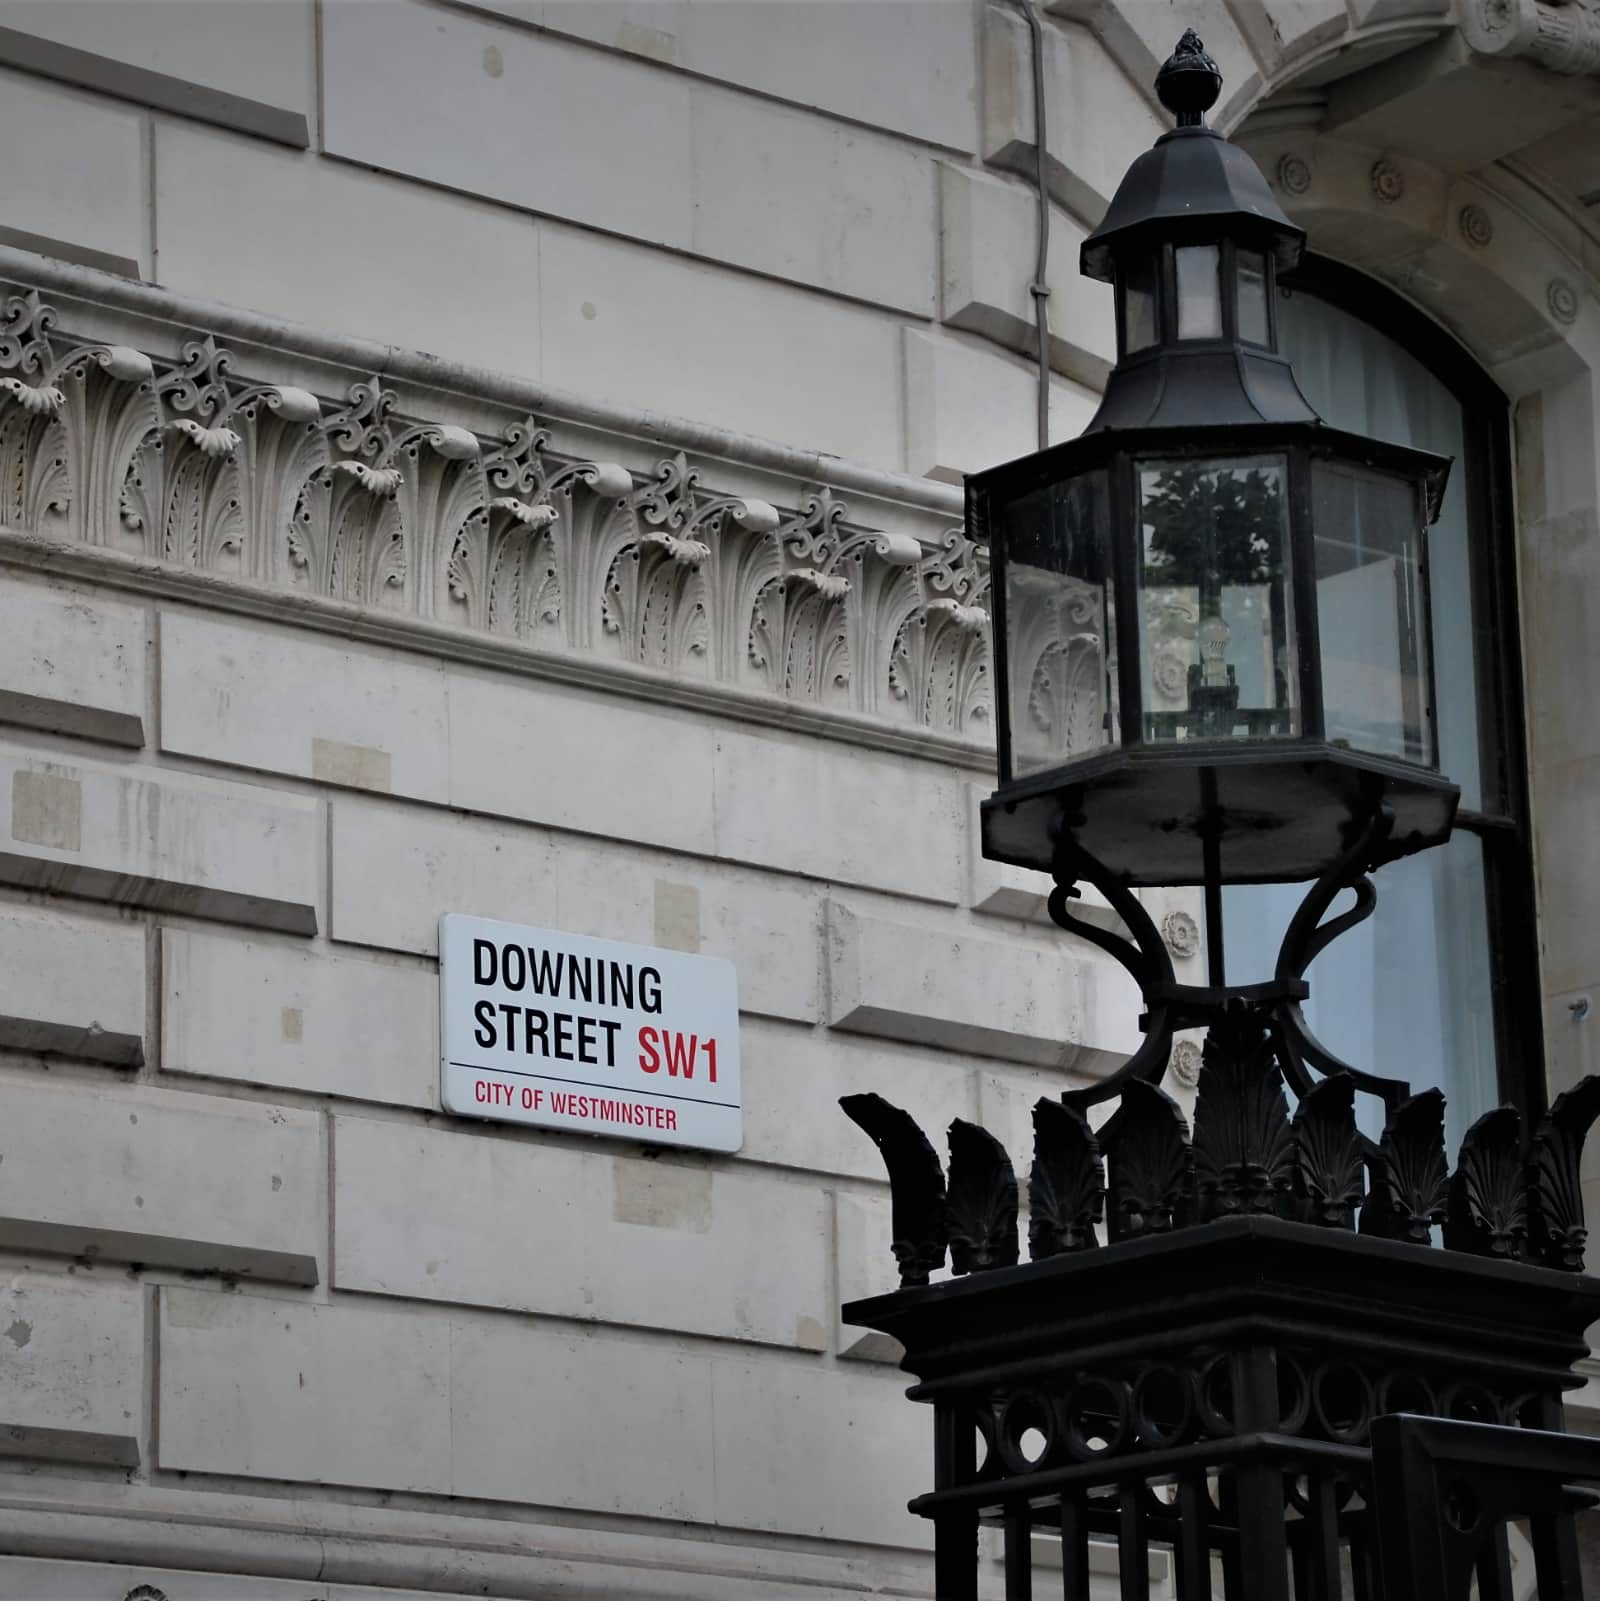 Downing Street Memo – why the silence?